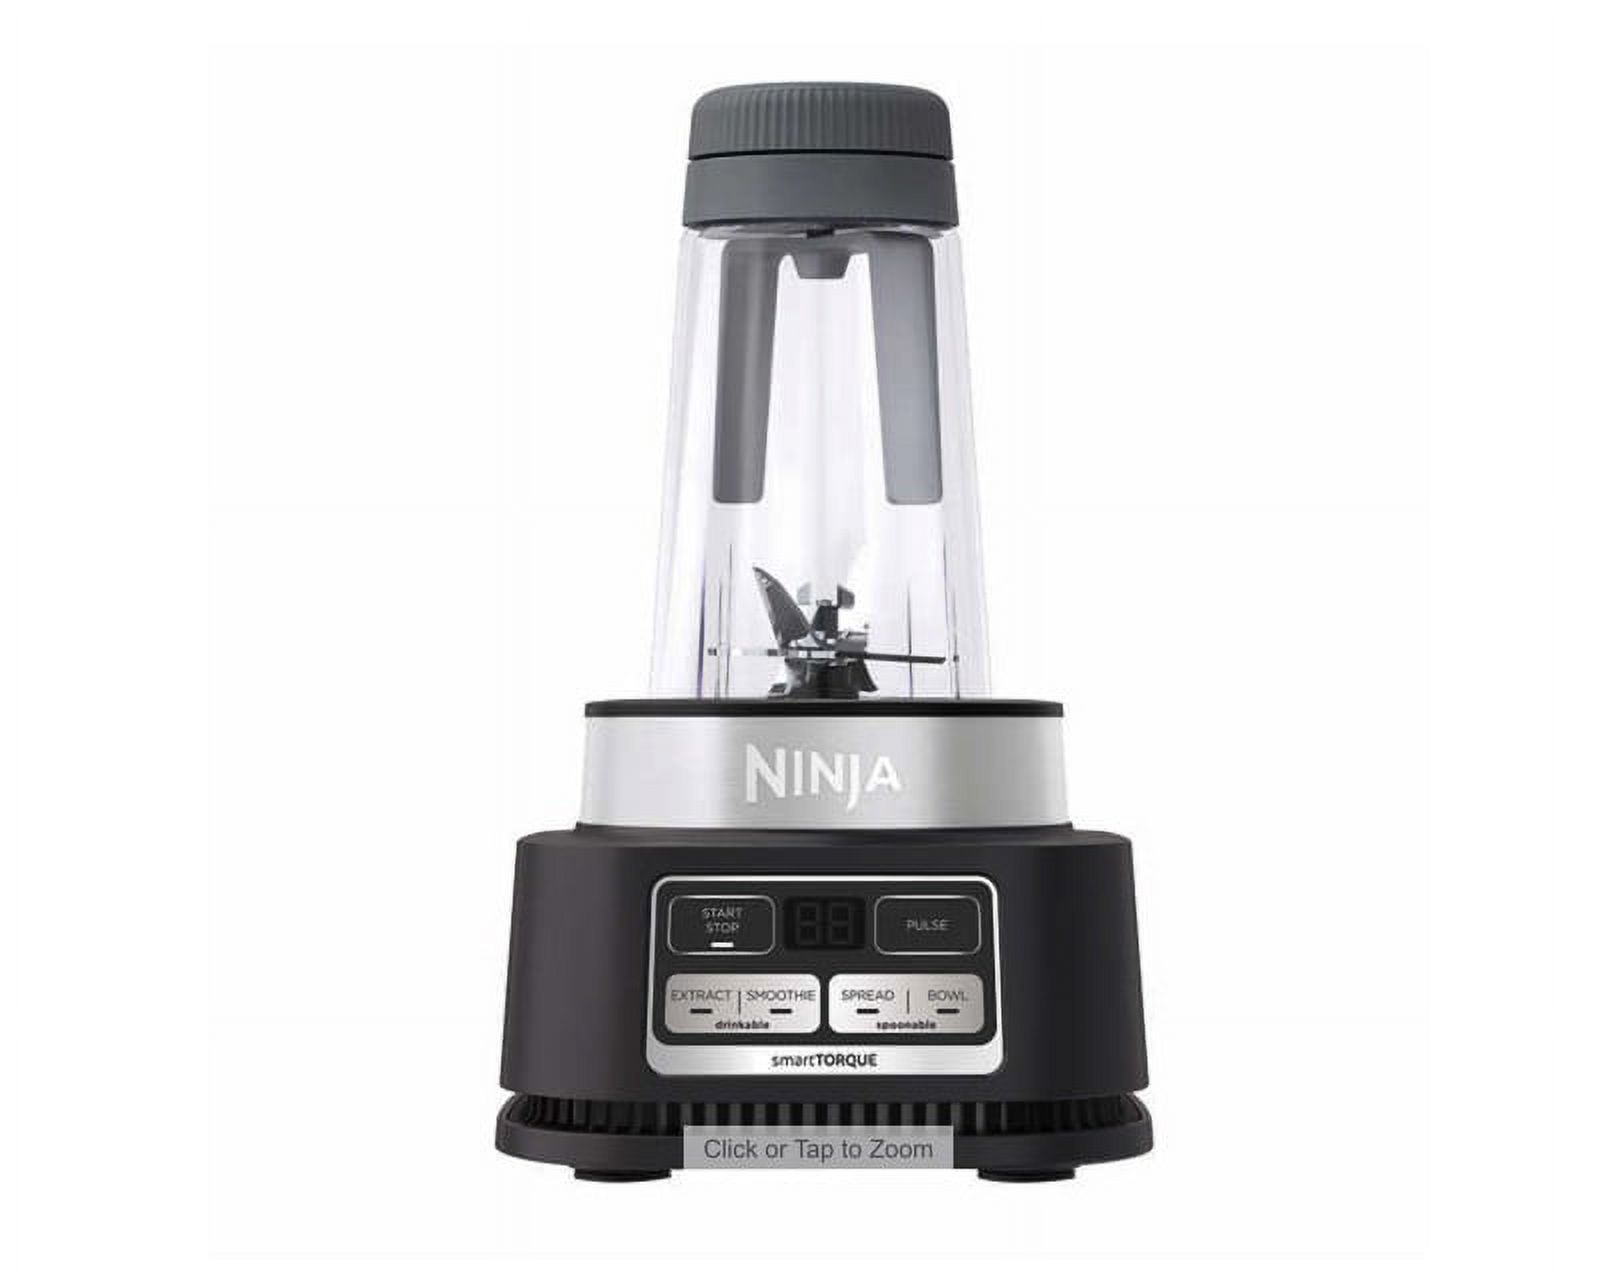 Ninja® Foodi® Smoothie Bowl Maker and Nutrient Extractor* 1200WP Personal Blender CO101B - image 2 of 7